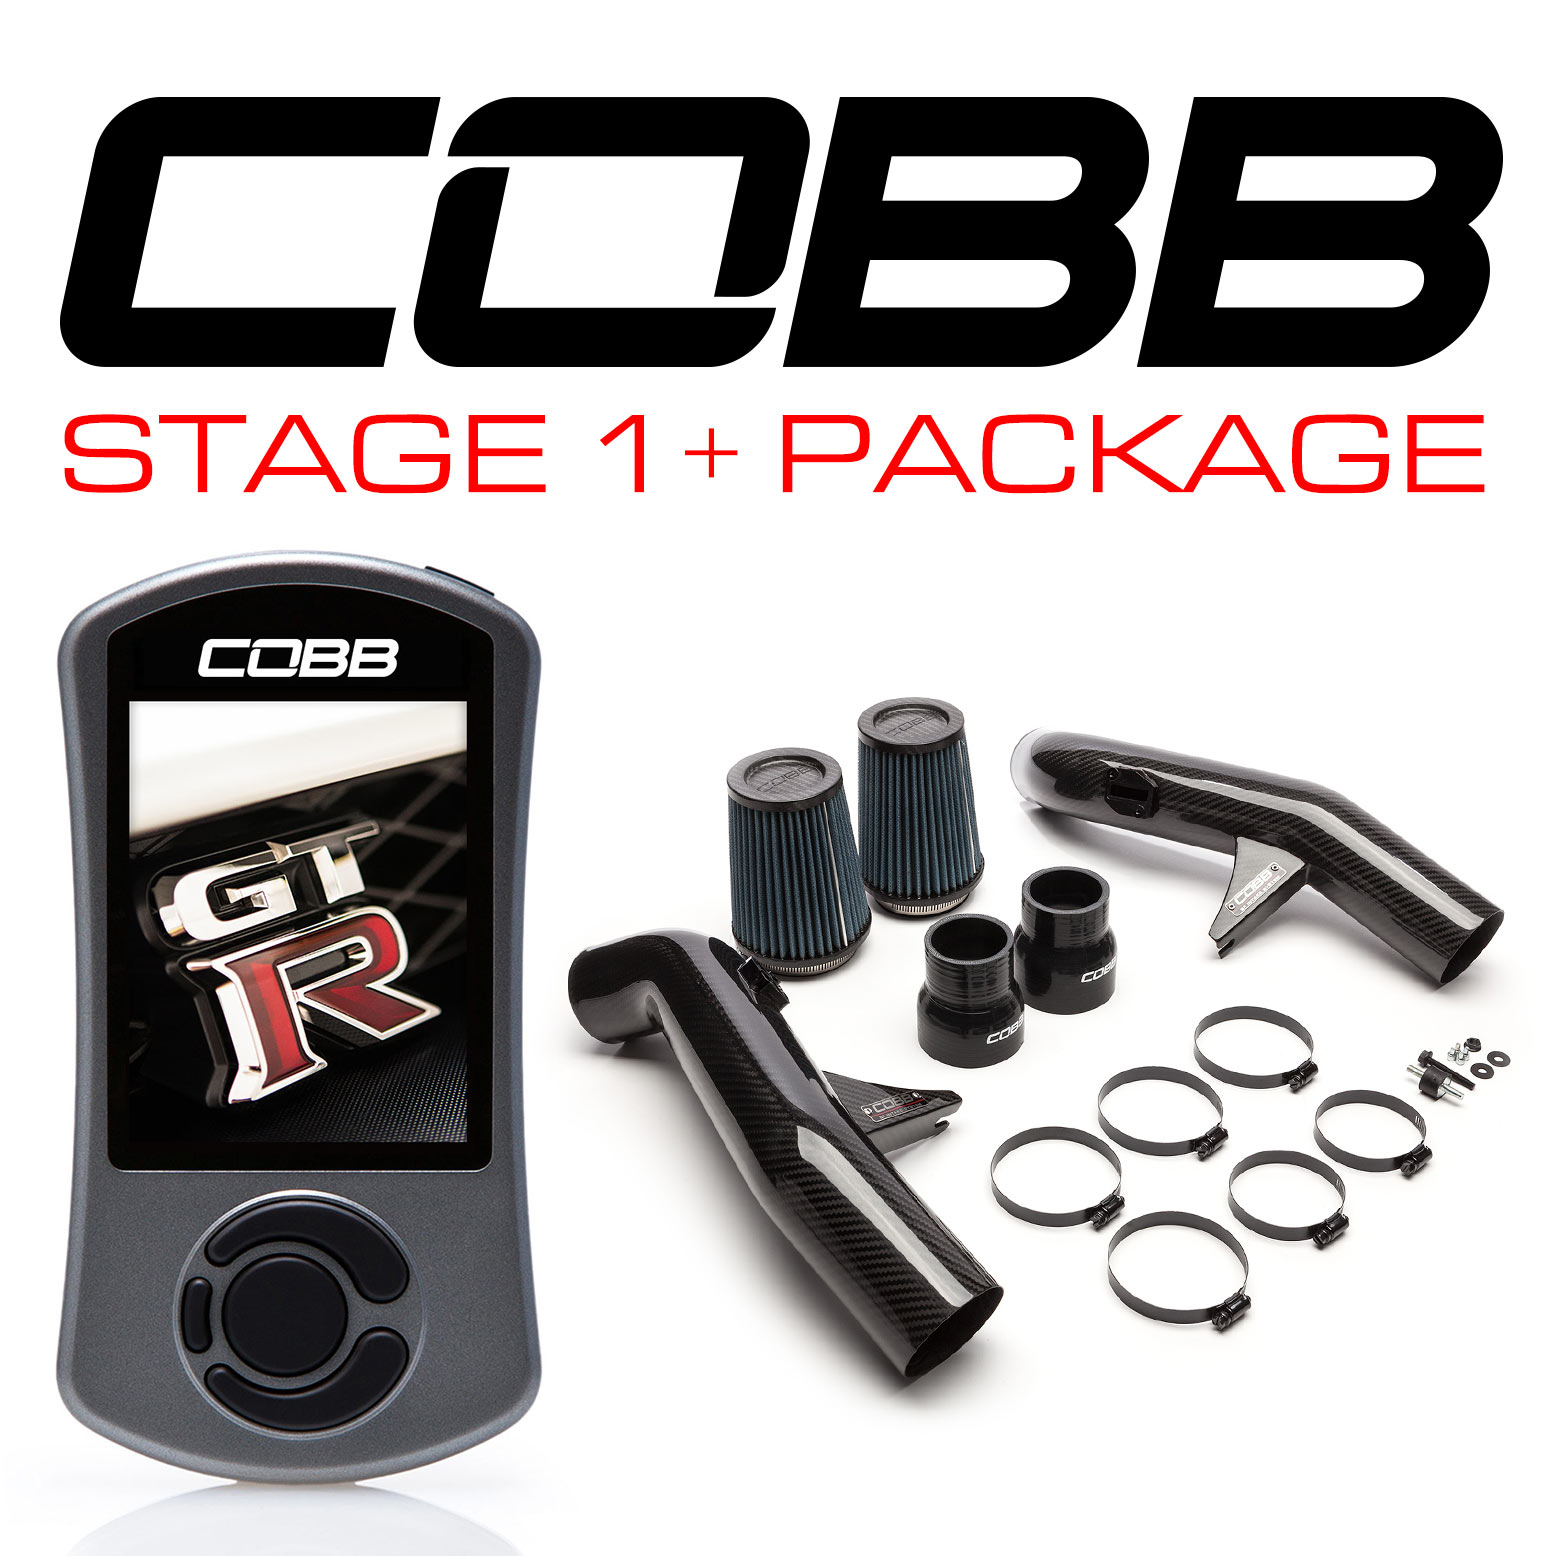 Nissan GT-R Stage 1 + Carbon Fiber Power Package NIS-006 with TCM Flashing